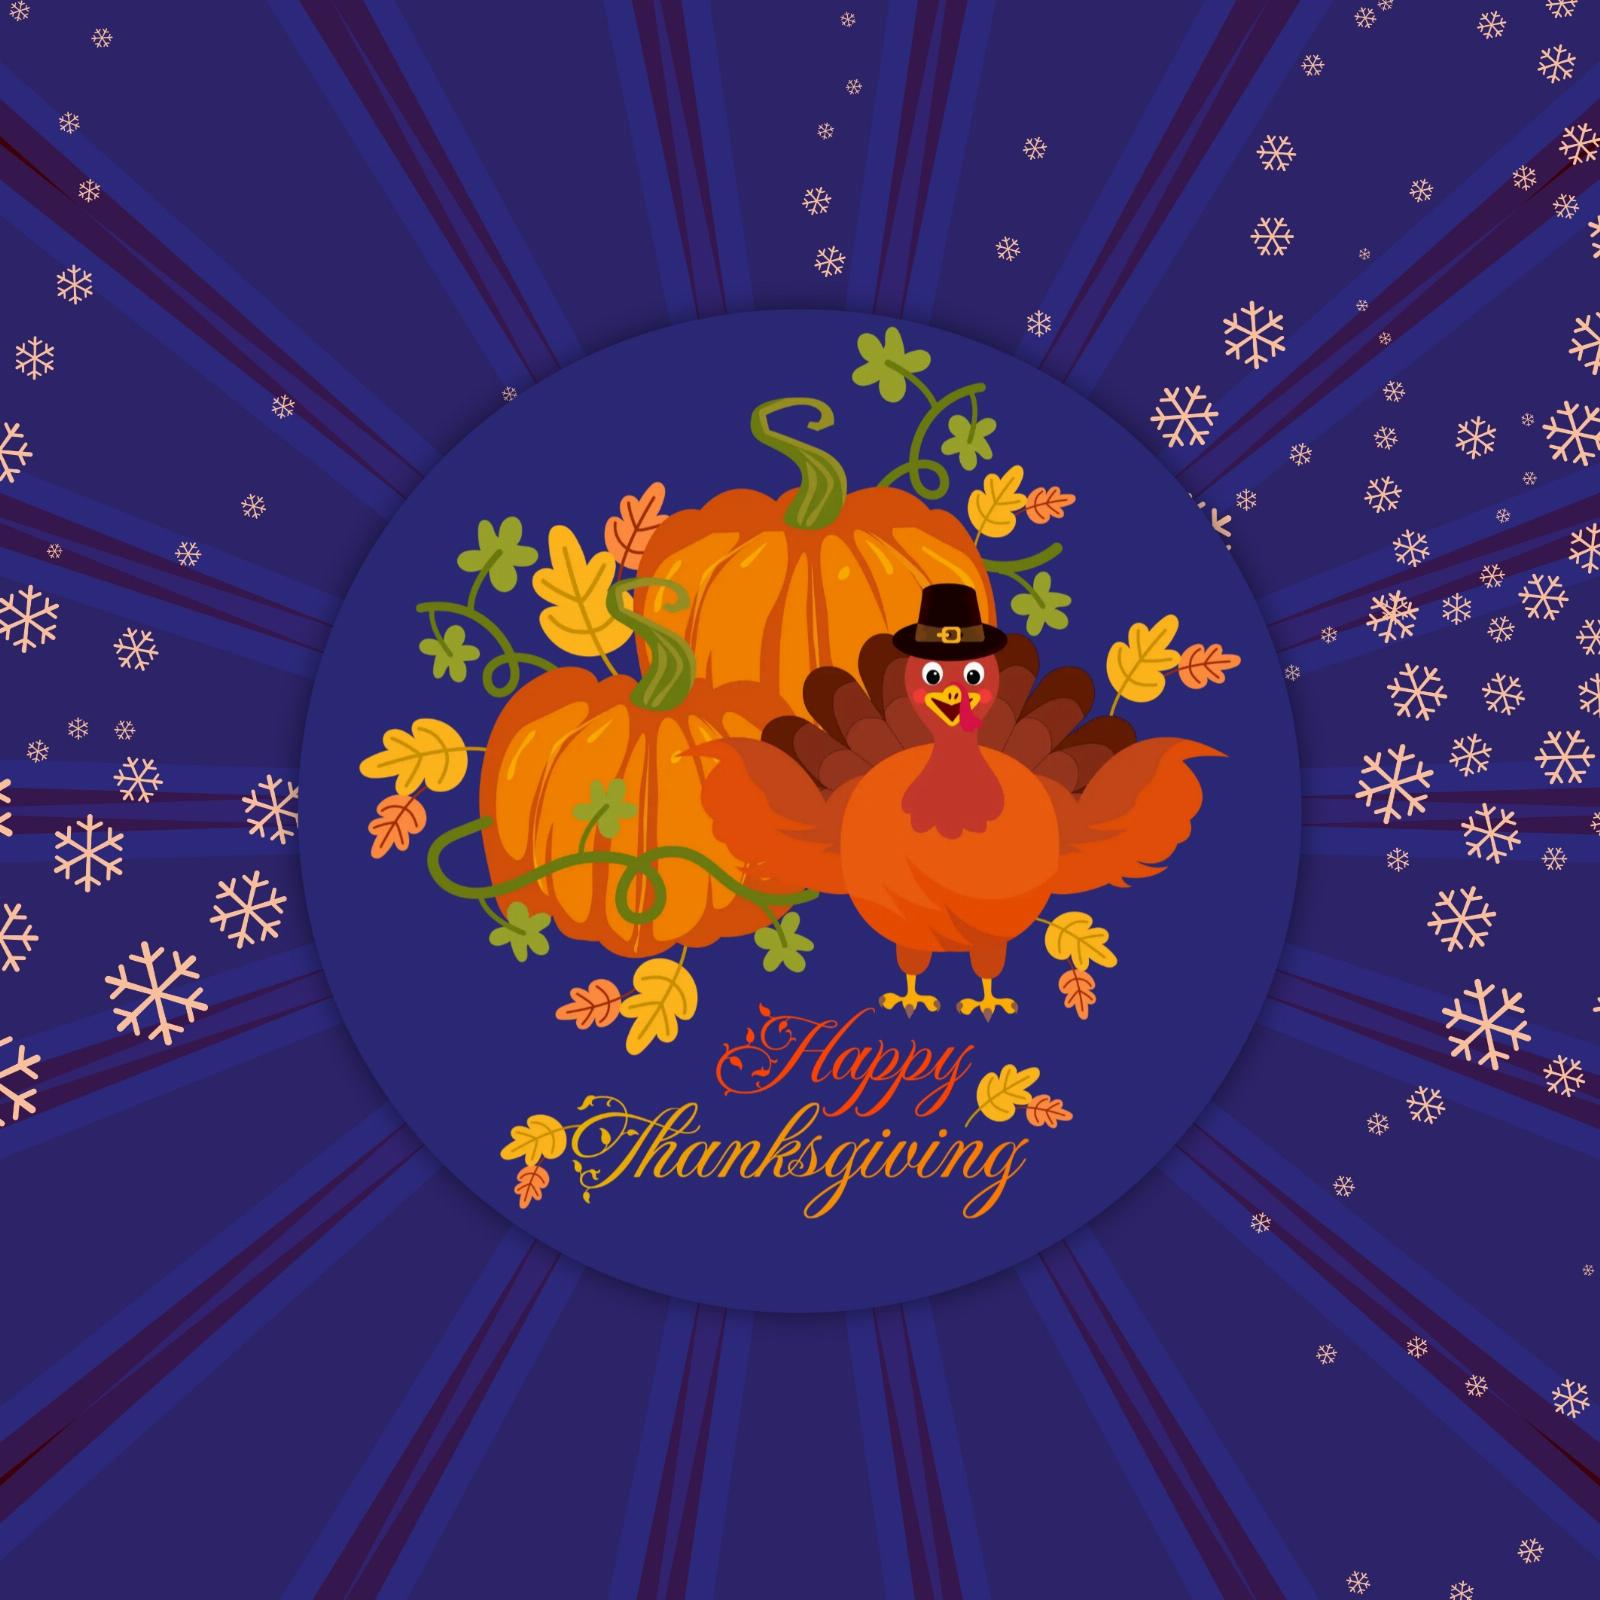 Free Happy Thanksgiving Images